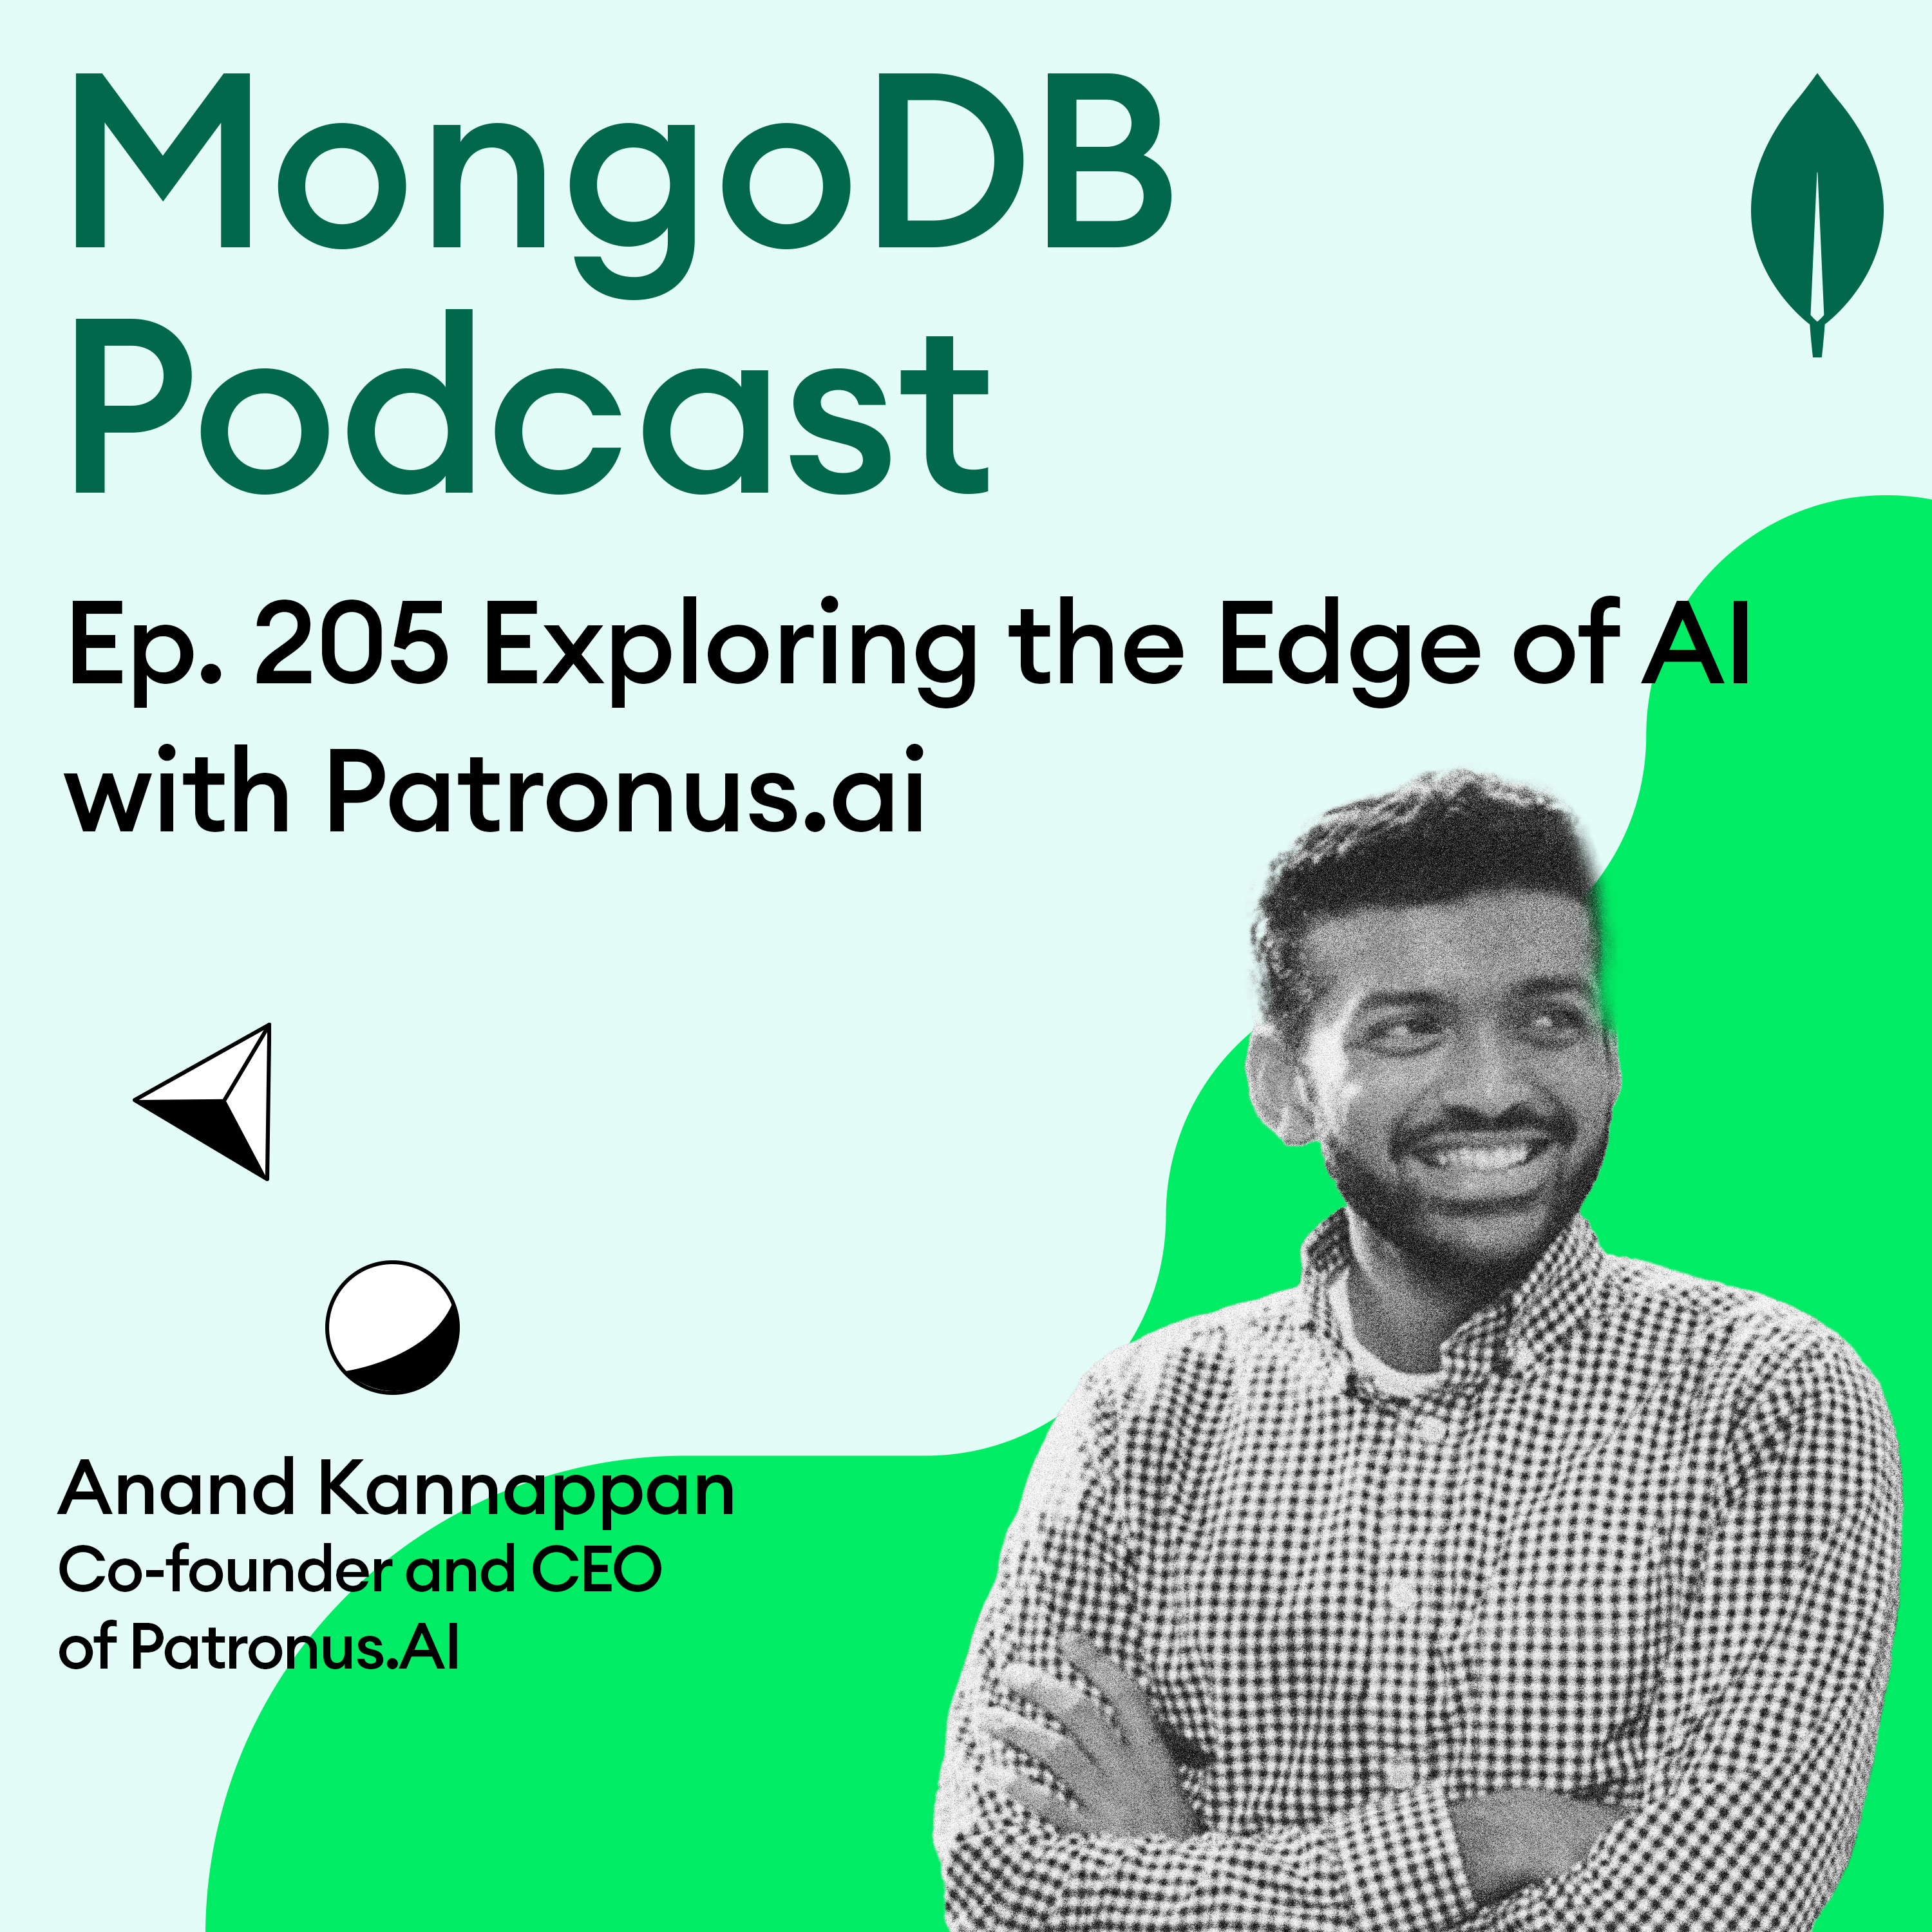 Ep. 205 Exploring the Edge of AI: MongoDB's New Frontier with Patronus.AI